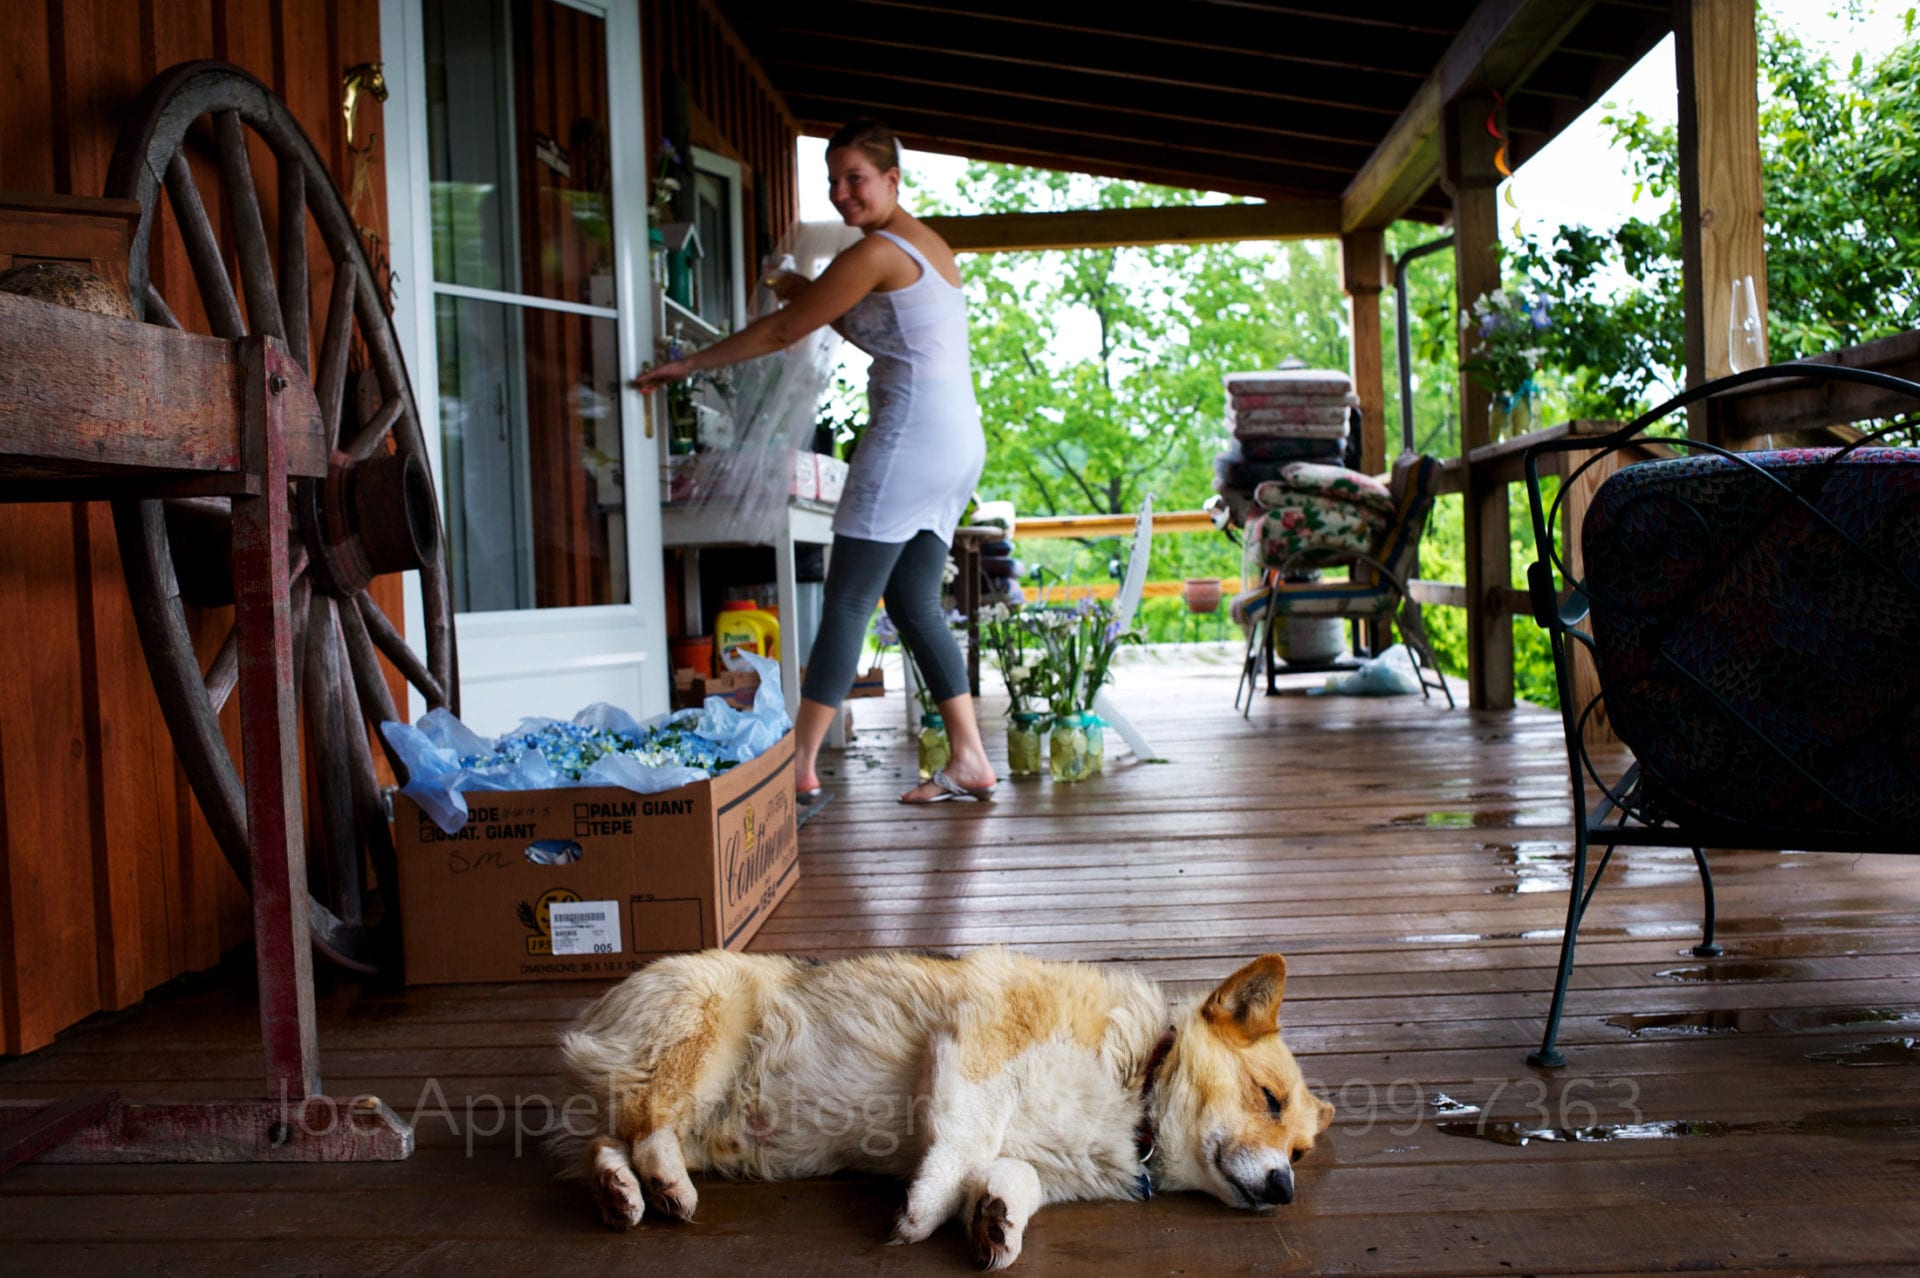 A corgi lays sleeping on a rainy porch as a woman laughs while looking at the dog on her way into a house. Armstrong Farms Weddings